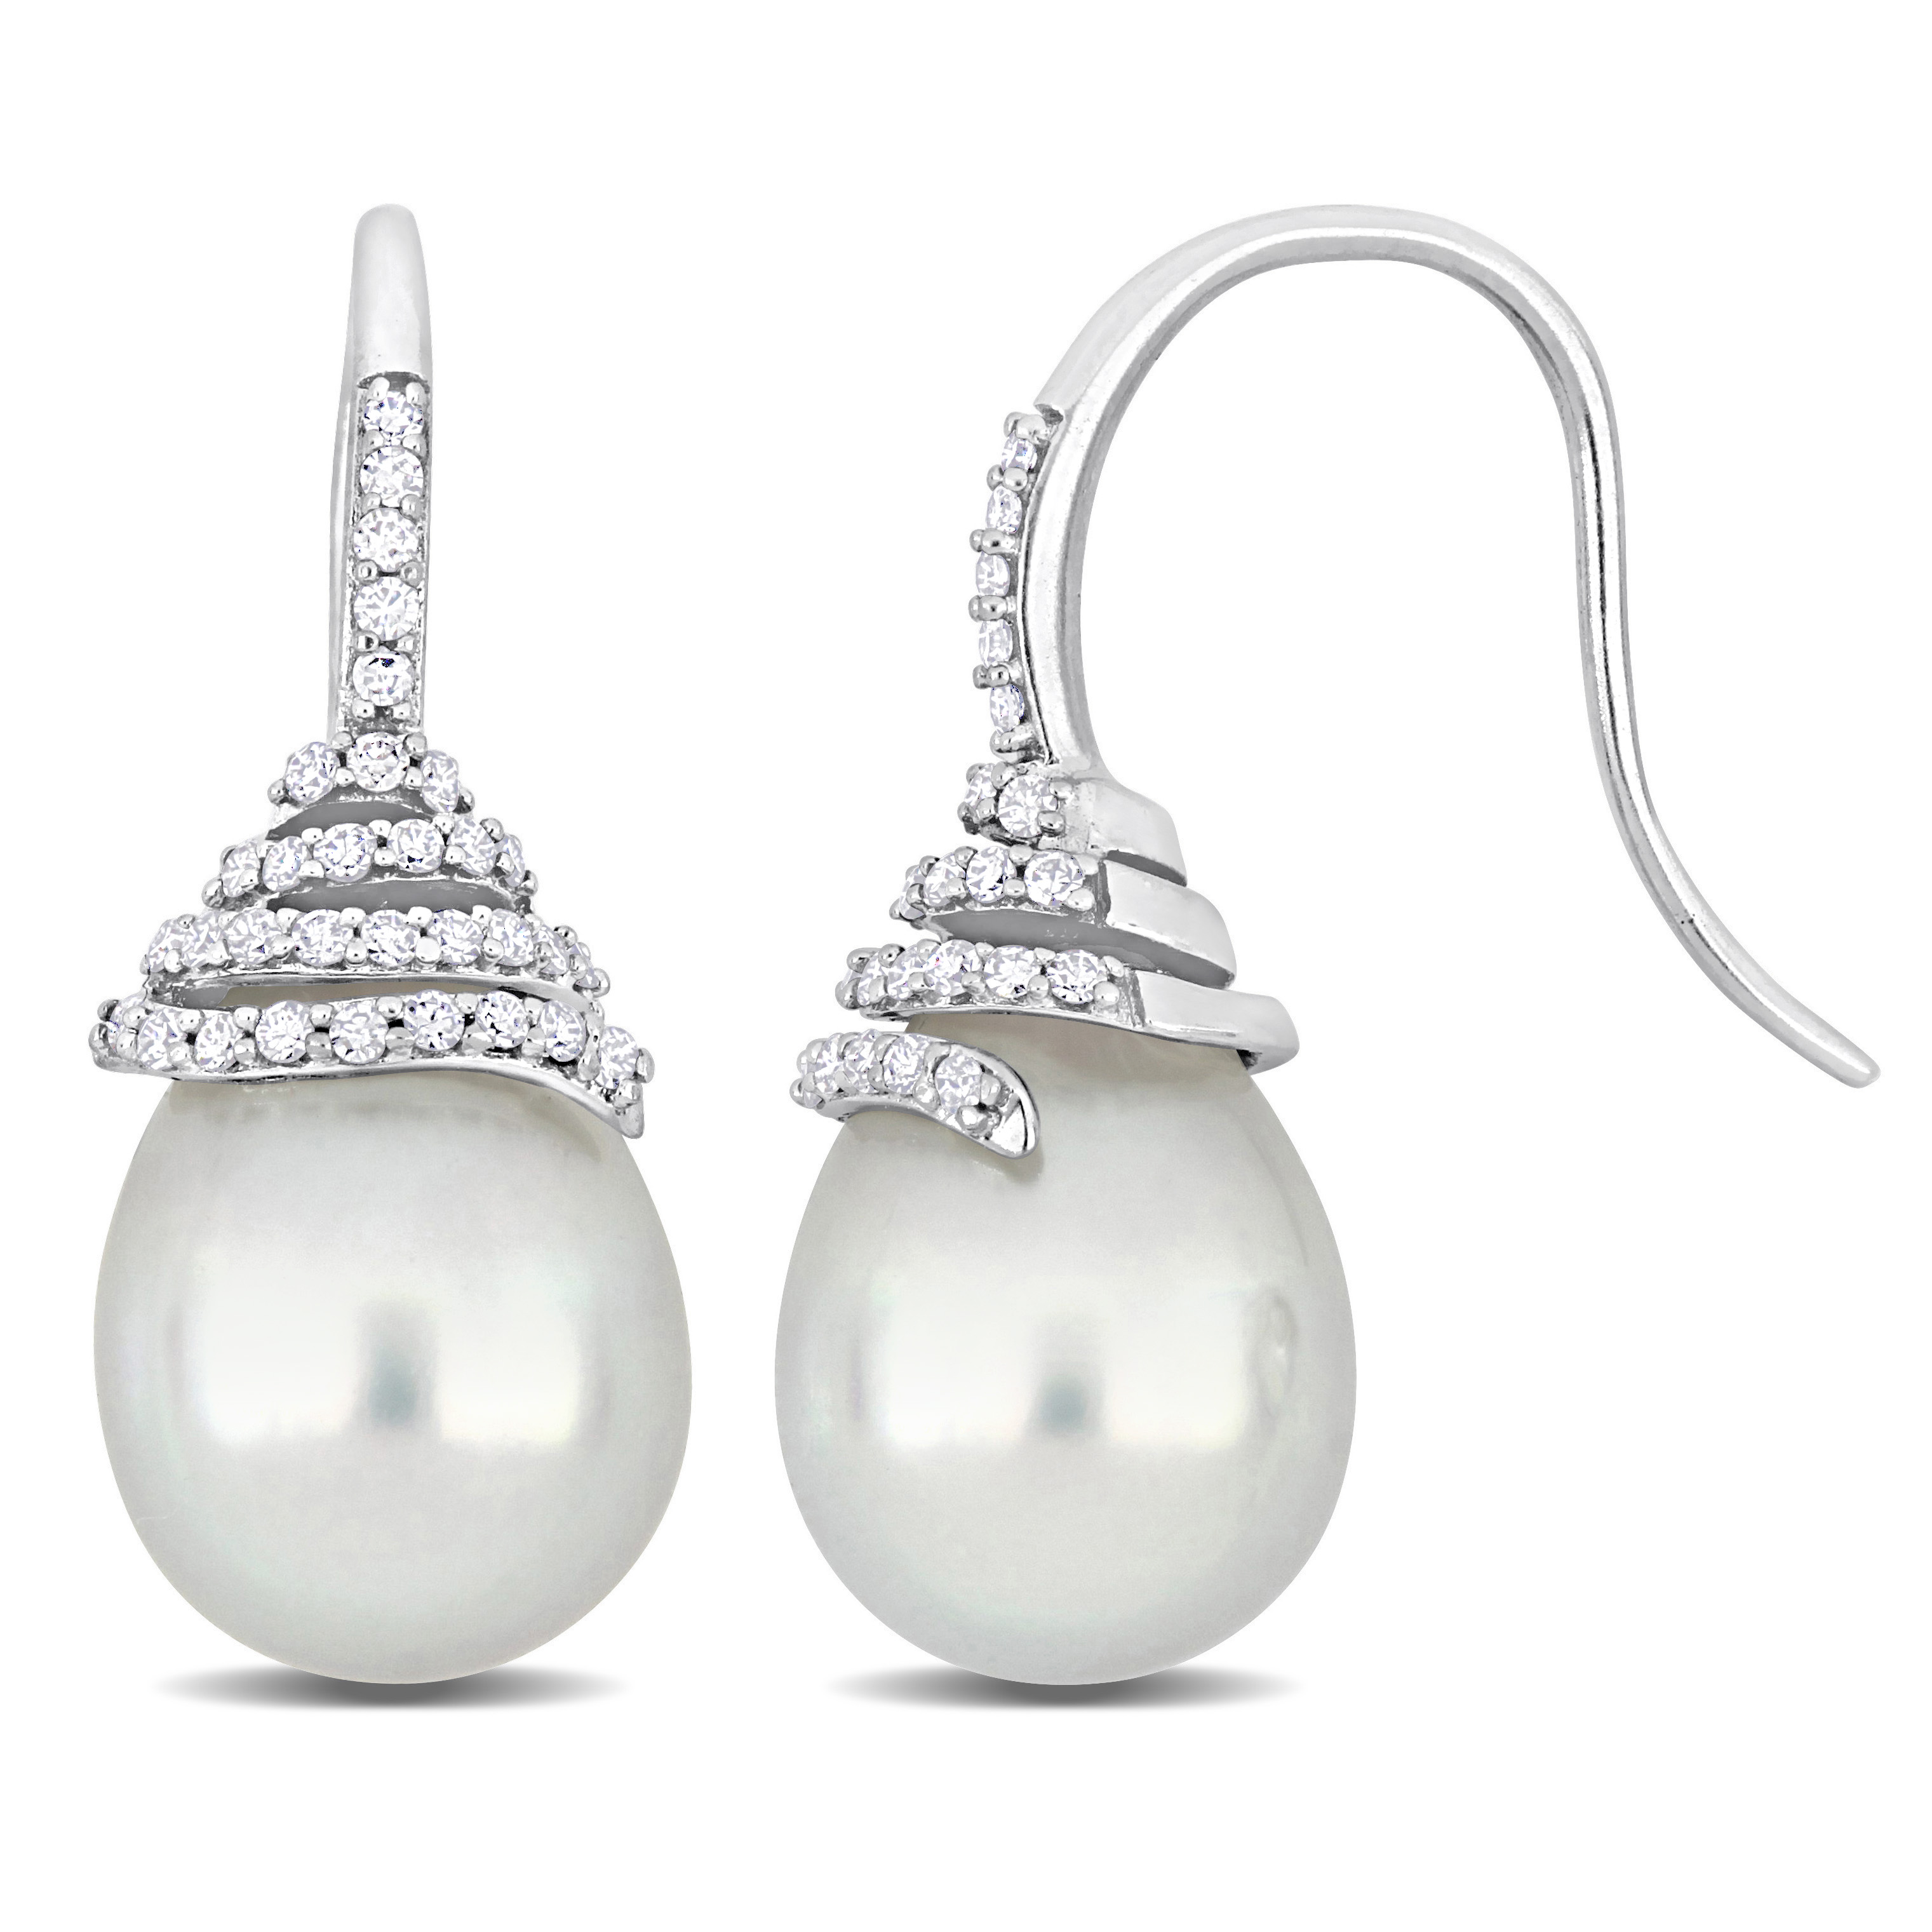 10-11 MM South Sea Cultured Pearl and 1/3 CT TW Diamond Swirl Hook Earrings in 14k White Gold